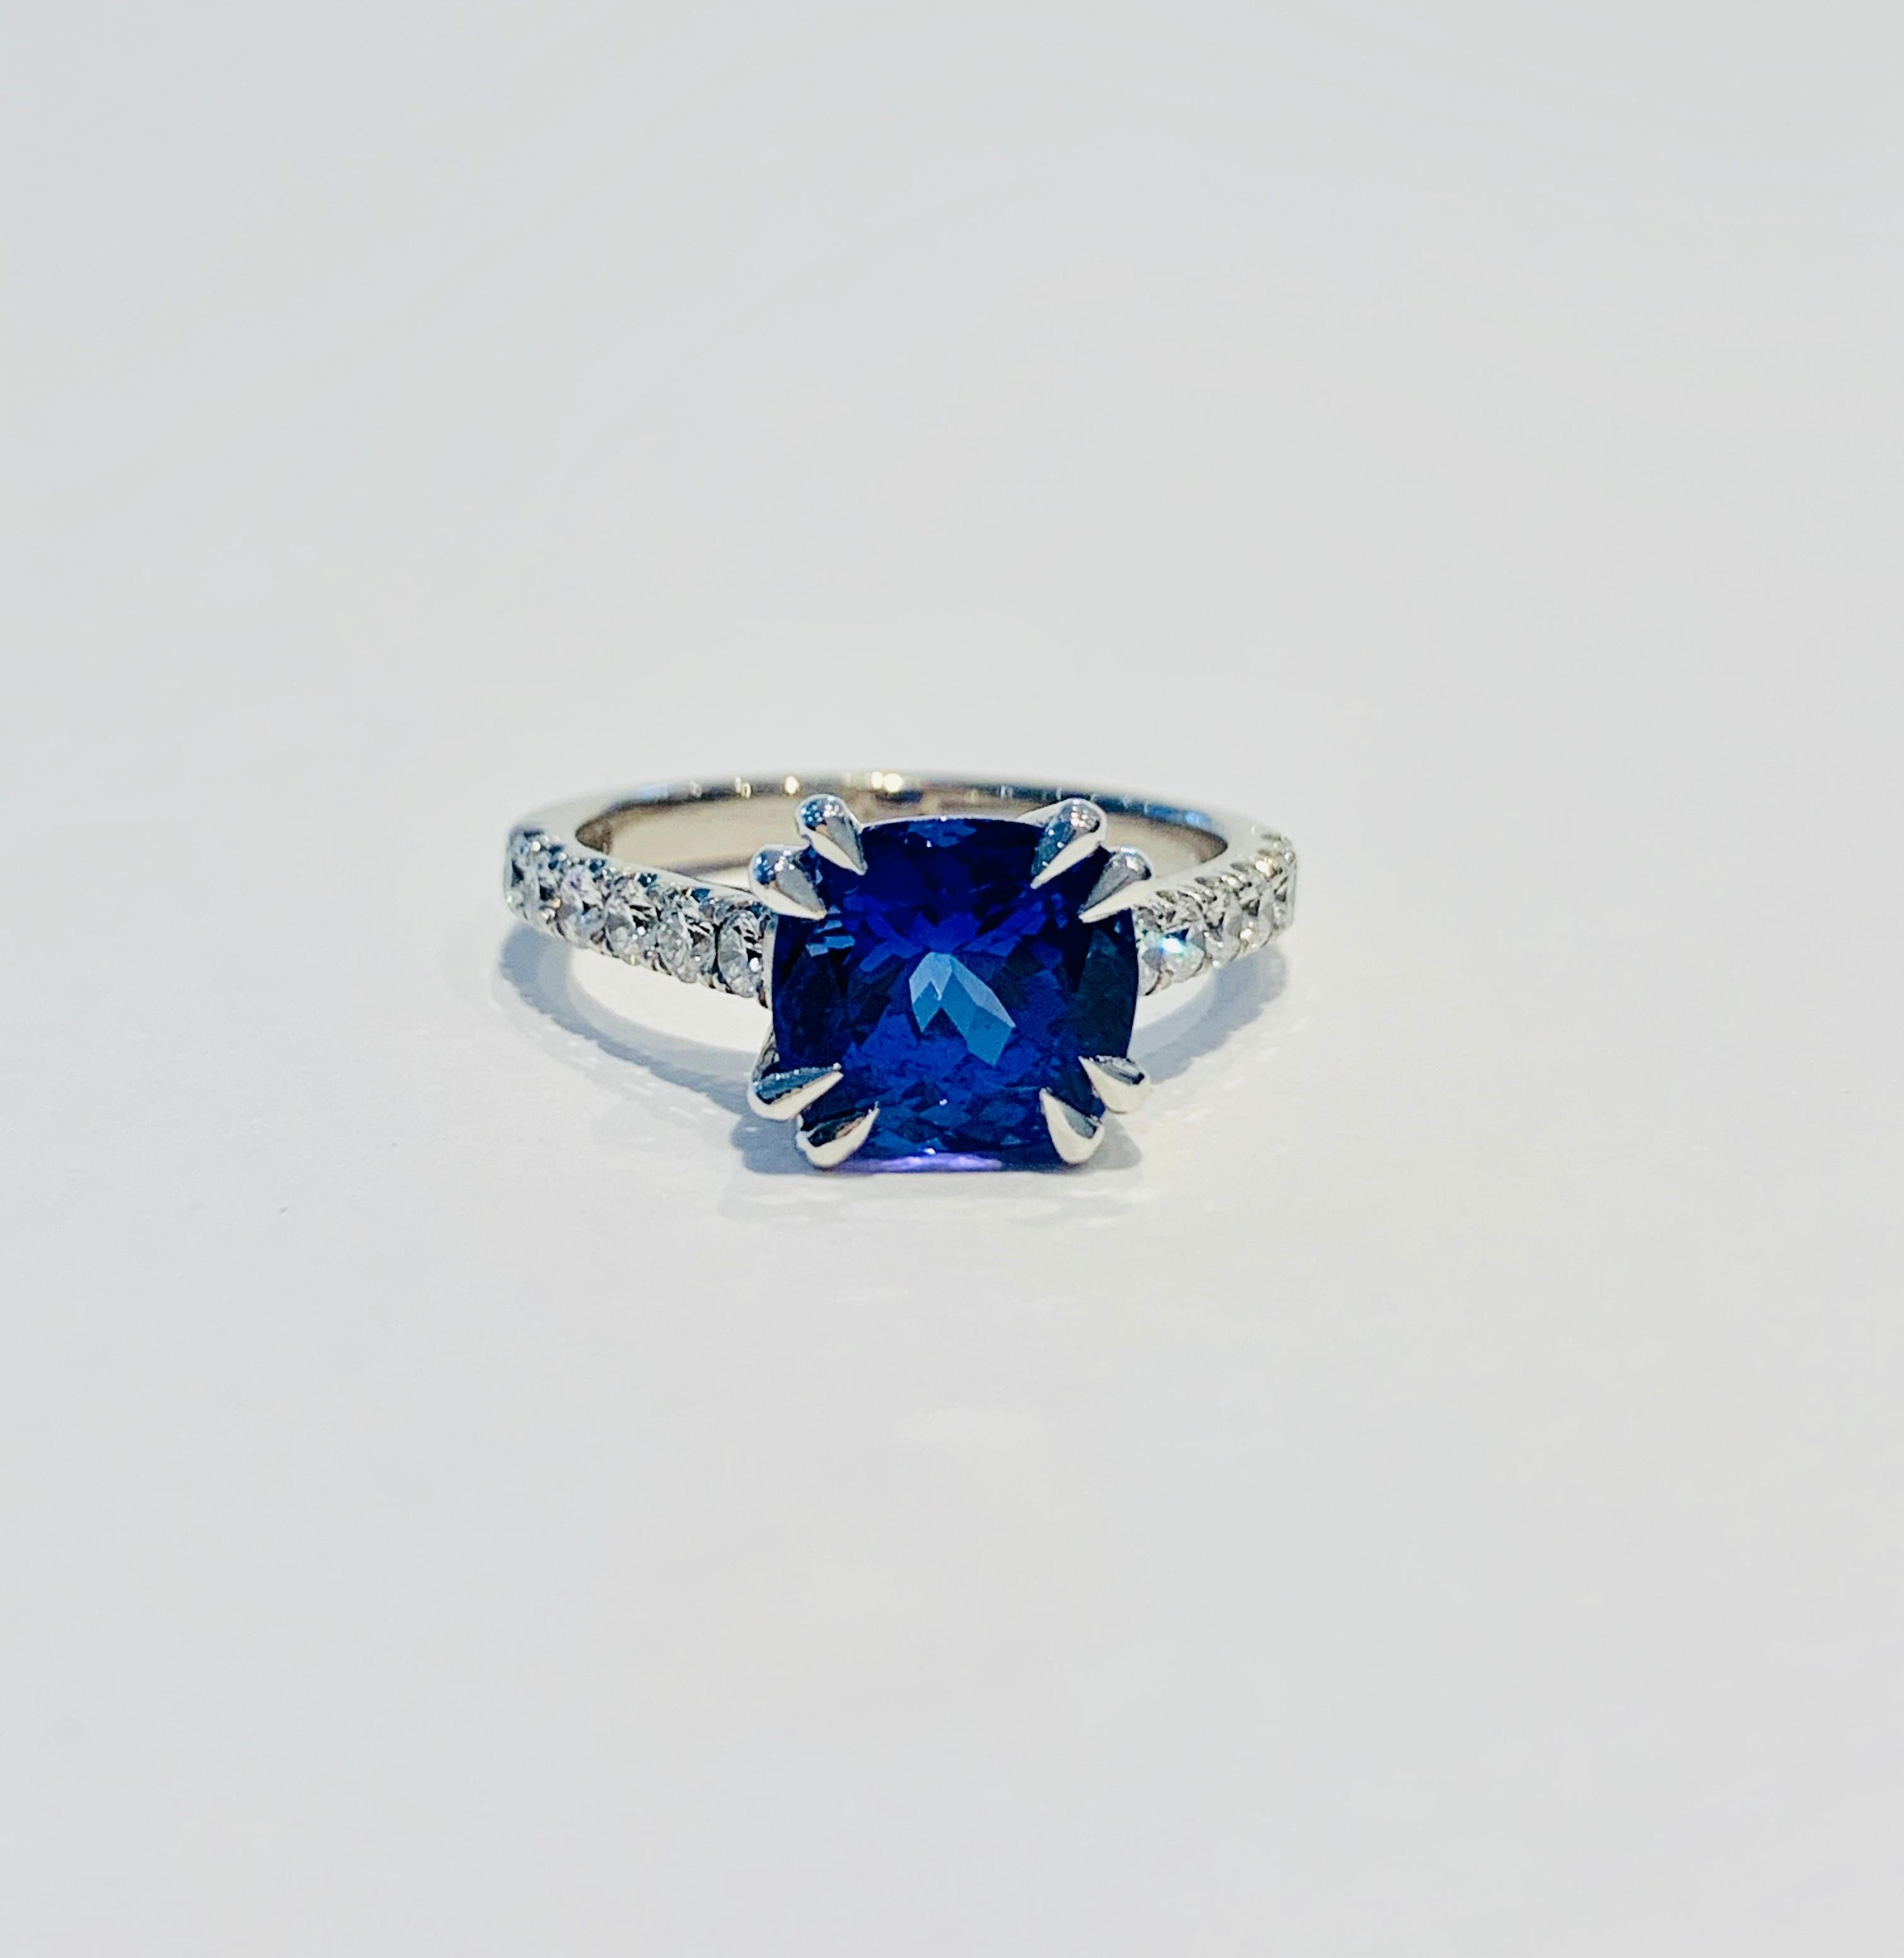 Women's Bespoke 2.69ct AAAA Cushion Cut Tanzanite and Diamond Ring in 18ct White Gold For Sale